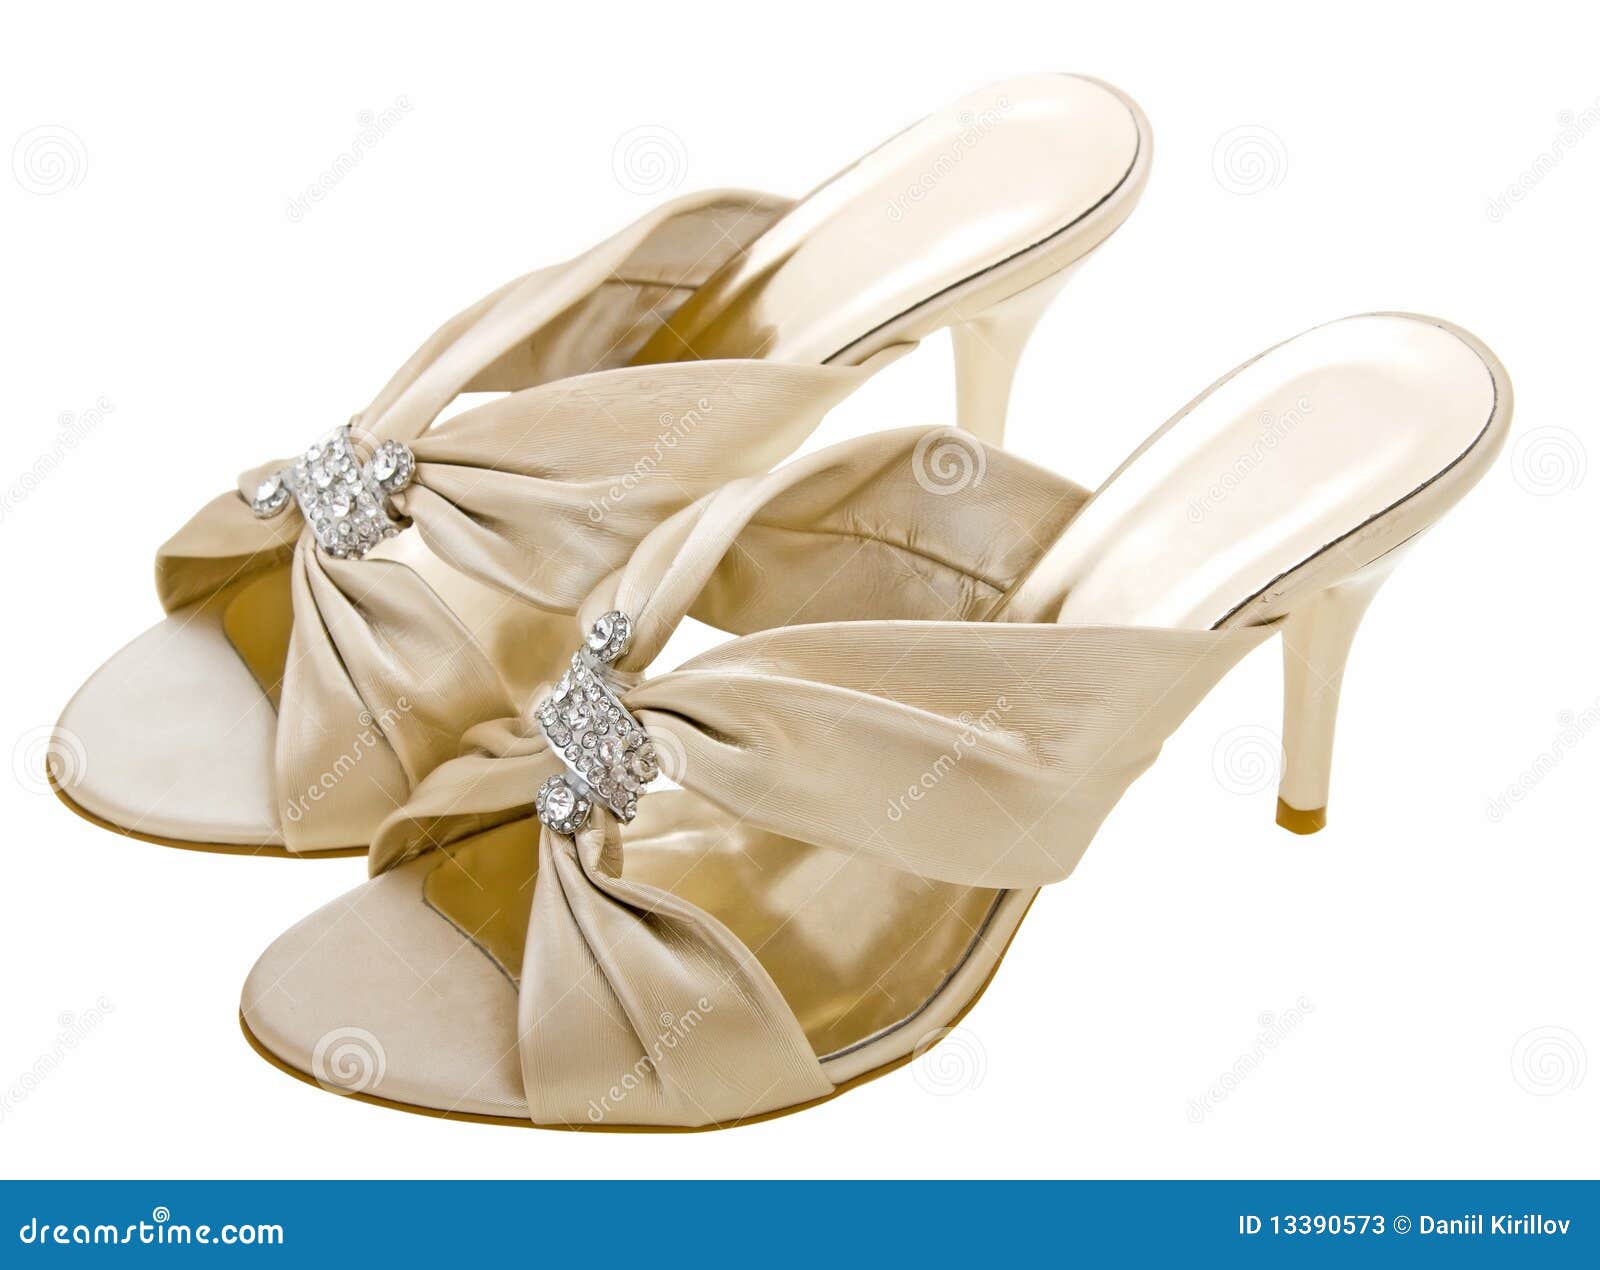 Gold women shoes isolated on white background.